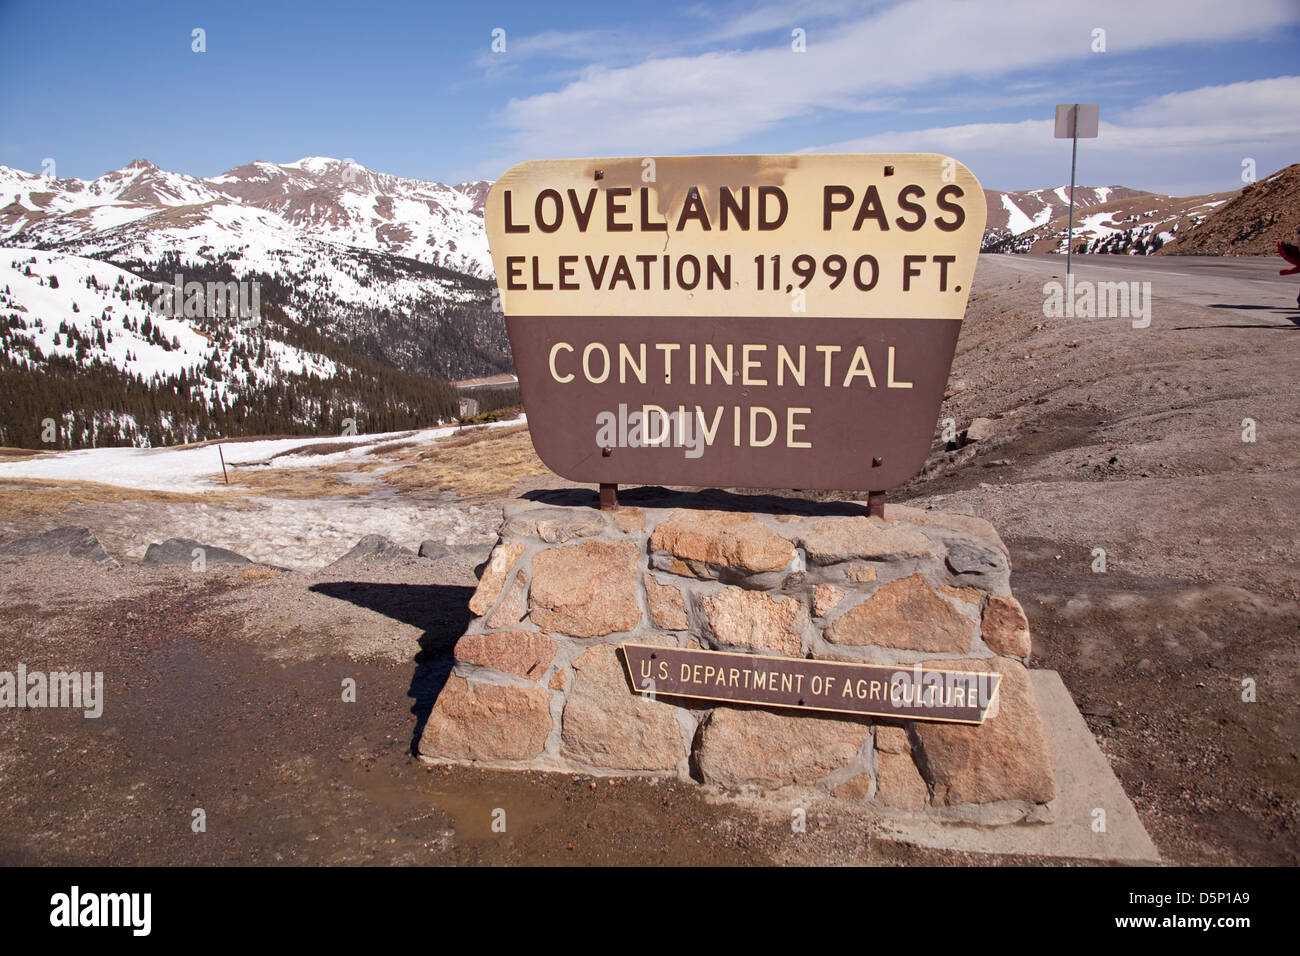 Continental Divide in Loveland pass Stock Photo